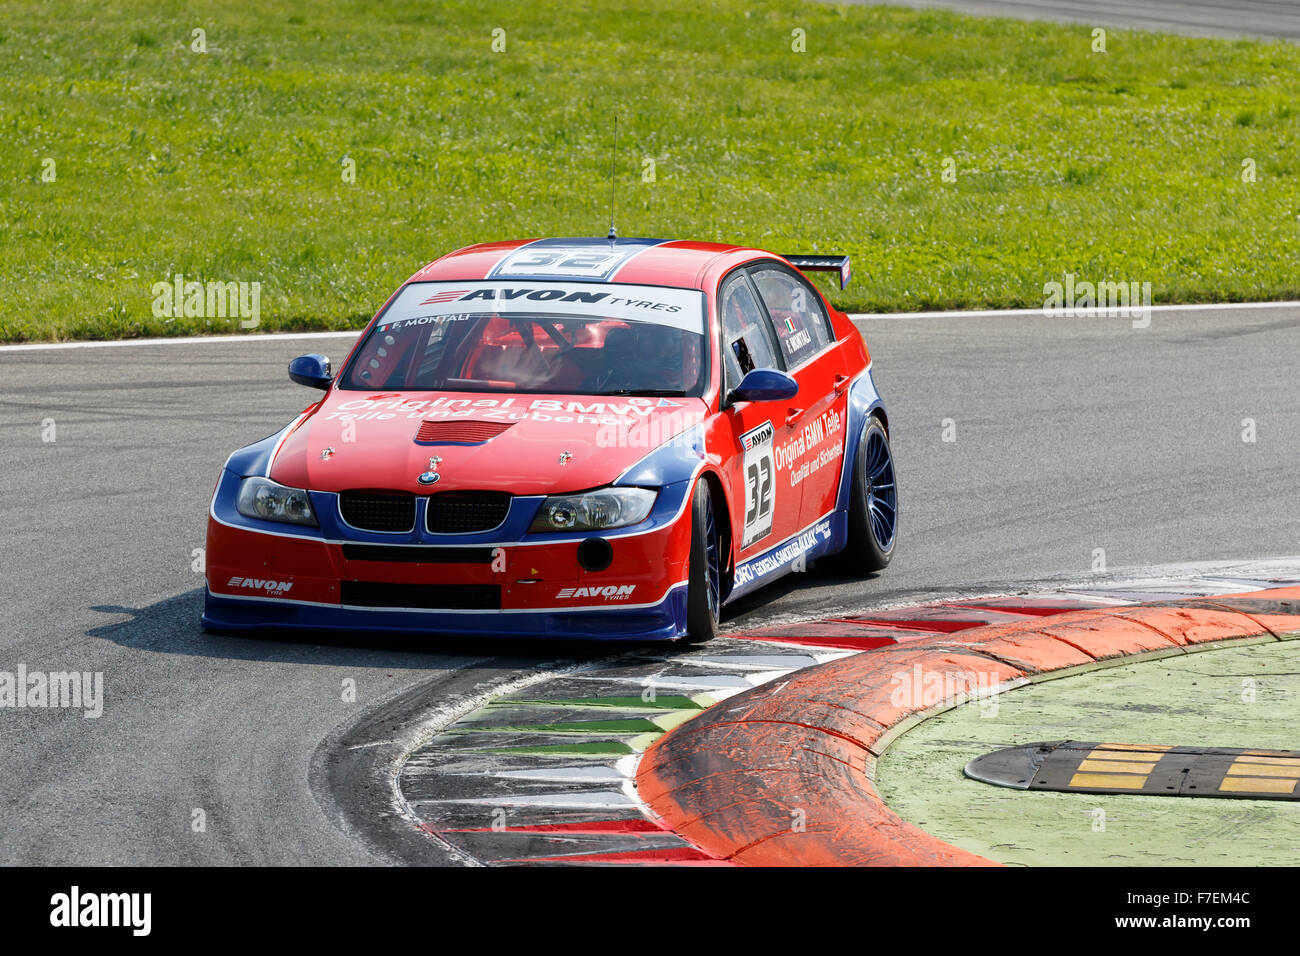 Monza, Italy - May 30, 2015: Bmw E90 of Hexagon Moto team, driven by MONTALI Fabrizio during the C.I. Turismo Endurance - Race in Autodromo Nazionale di Monza Circuit on May 30, 2015 in Monza, Italy. Stock Photo